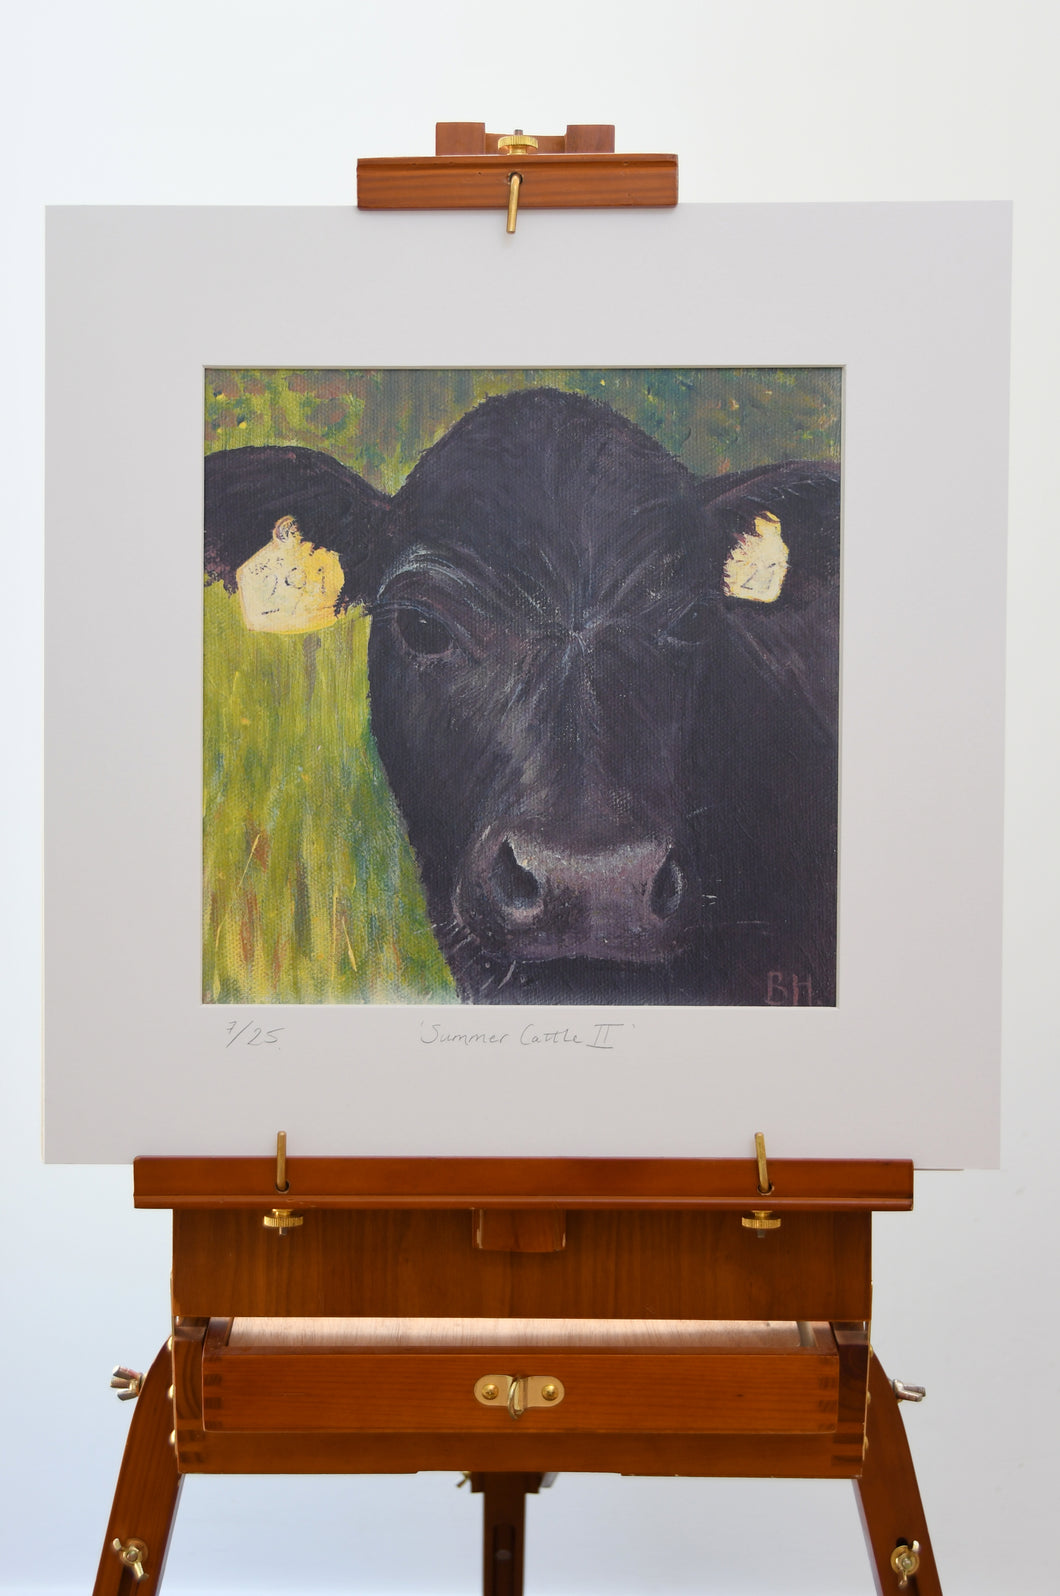 Summer Cattle II - Limited Edition Print